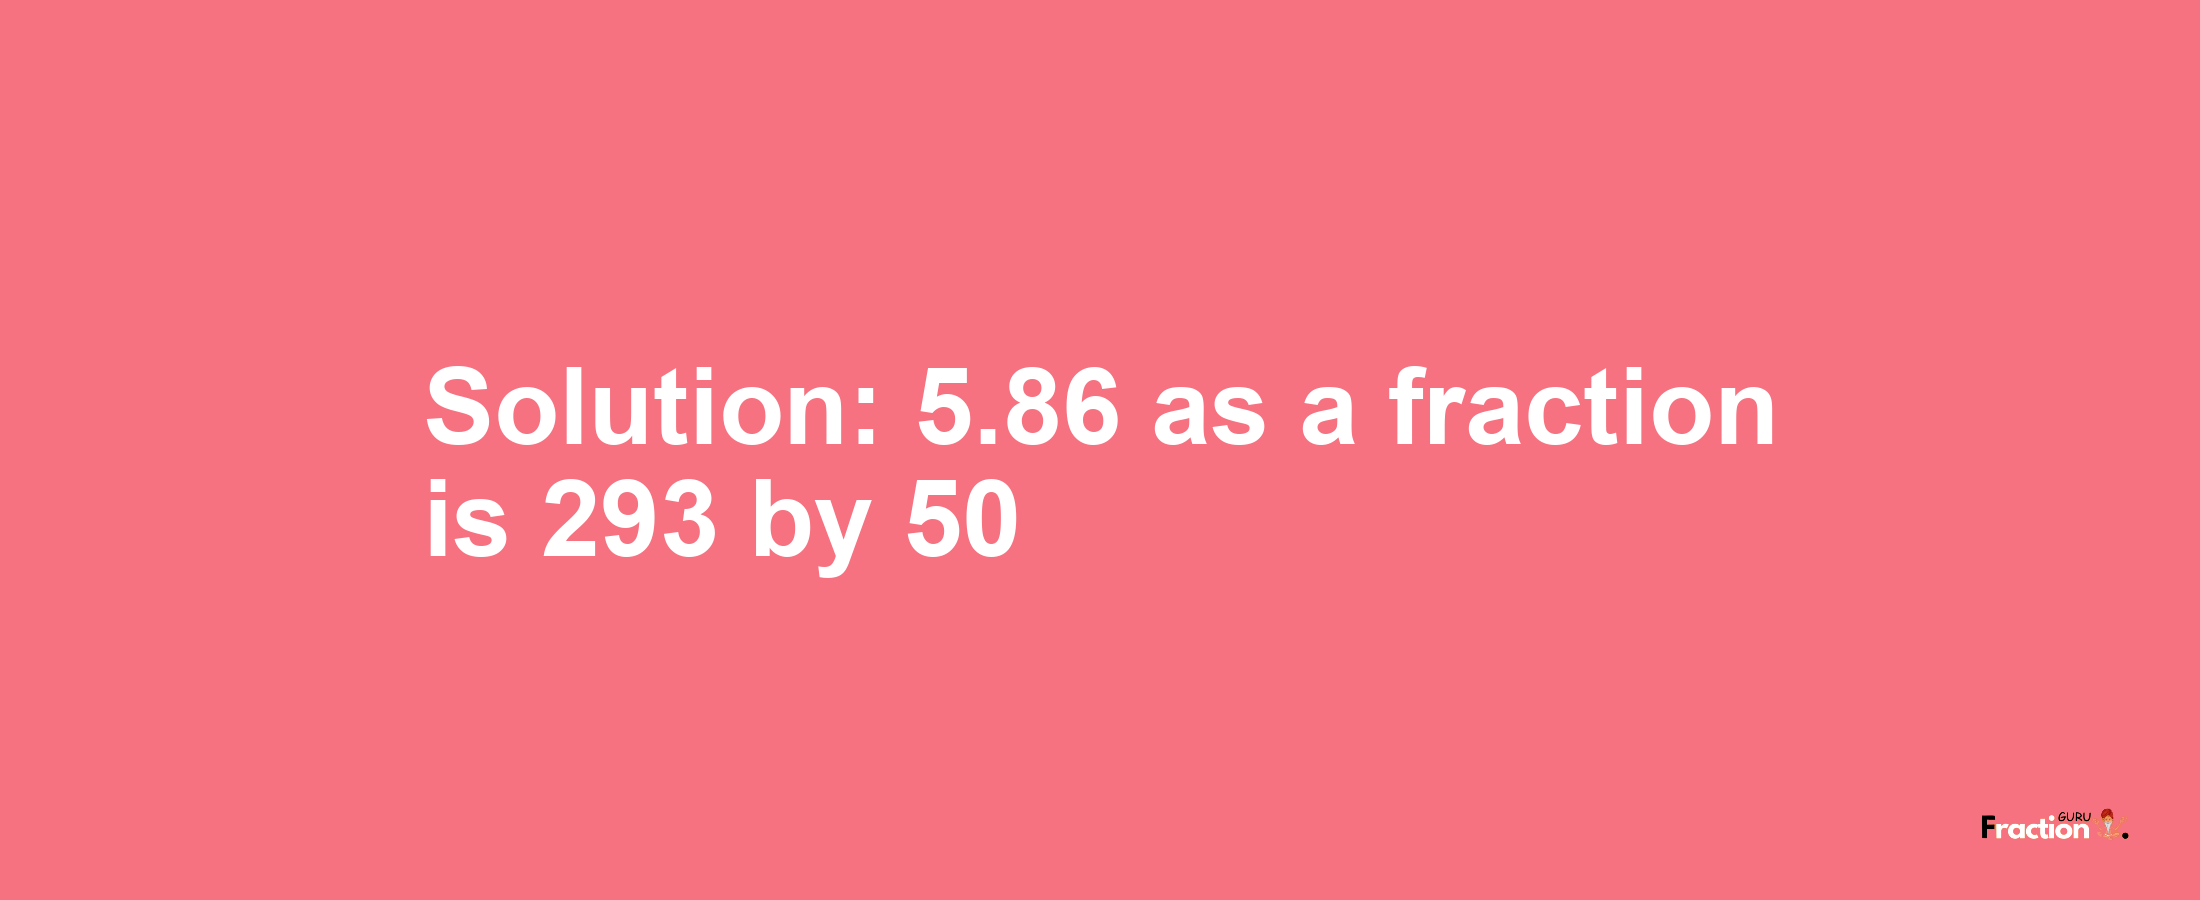 Solution:5.86 as a fraction is 293/50